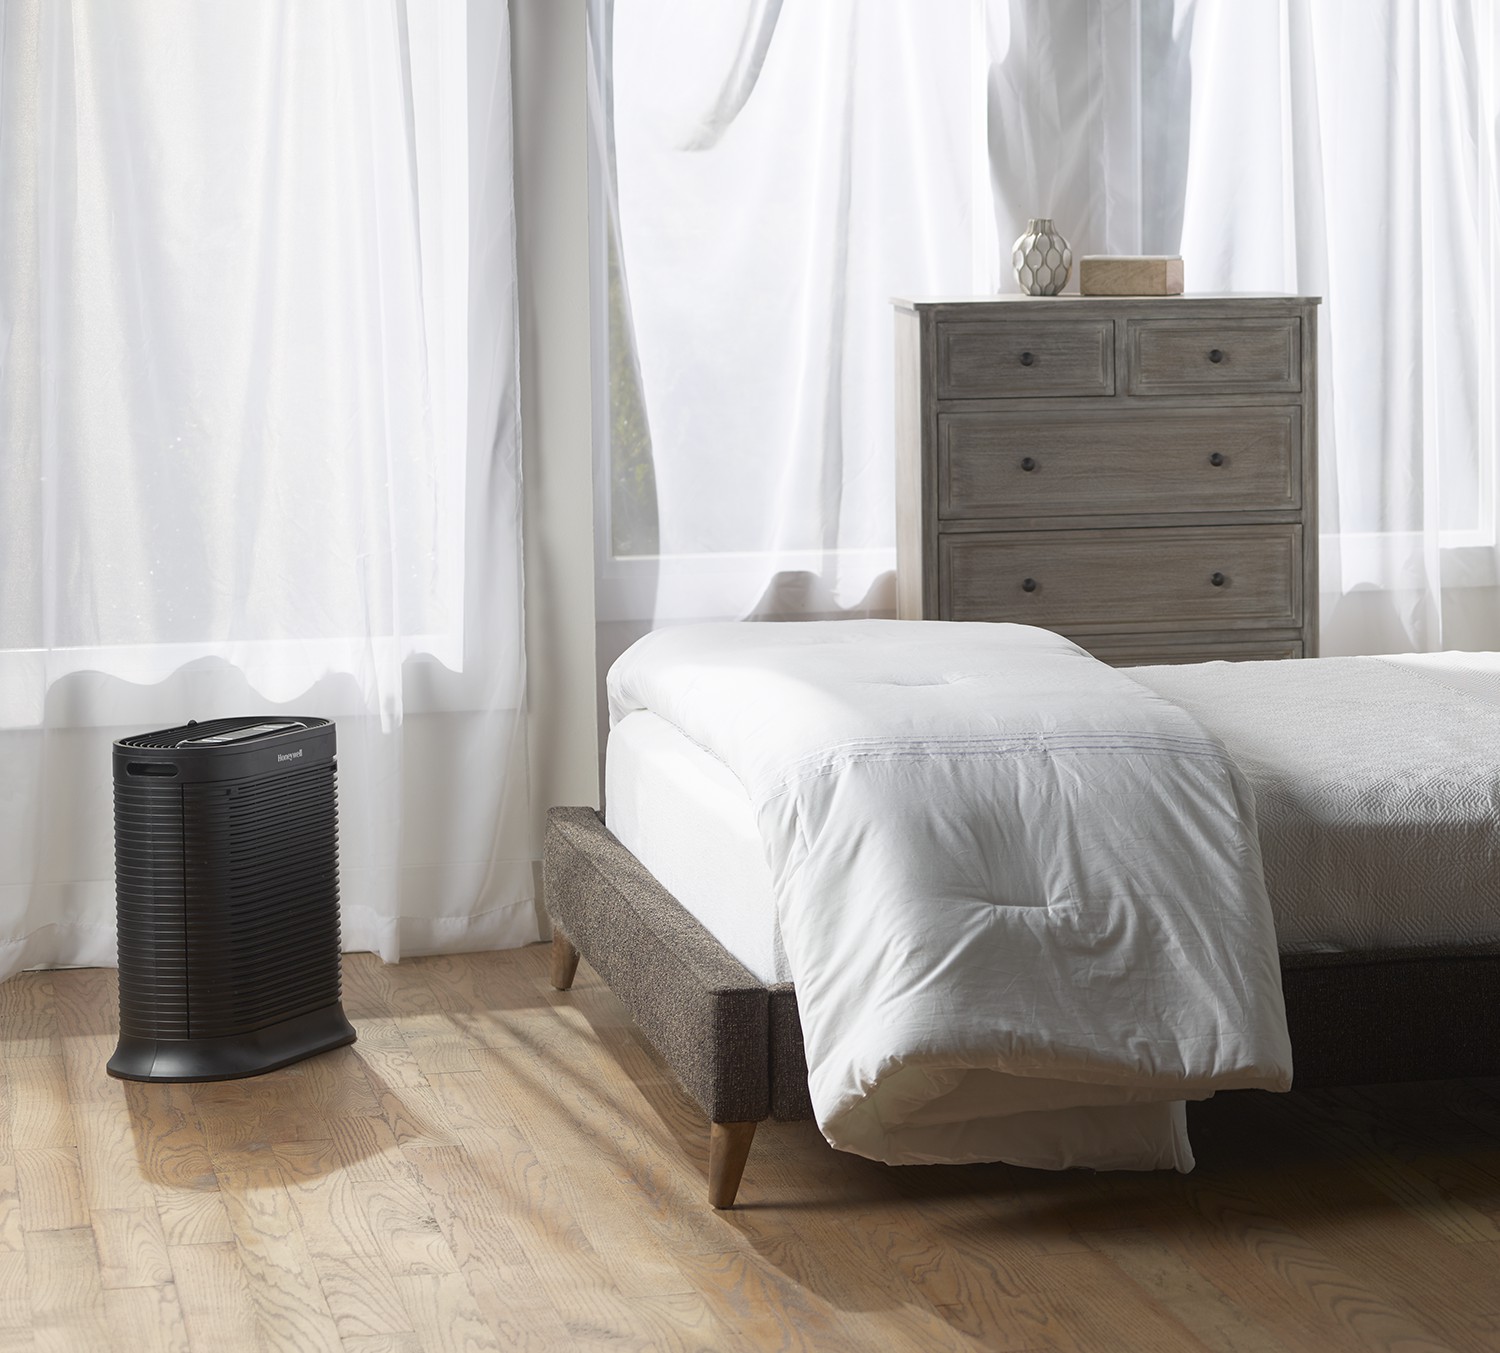 Honeywell Bluetooth HEPA Air Purifier for Large Rooms (310 sq ft), Black, HPA250B - image 5 of 6